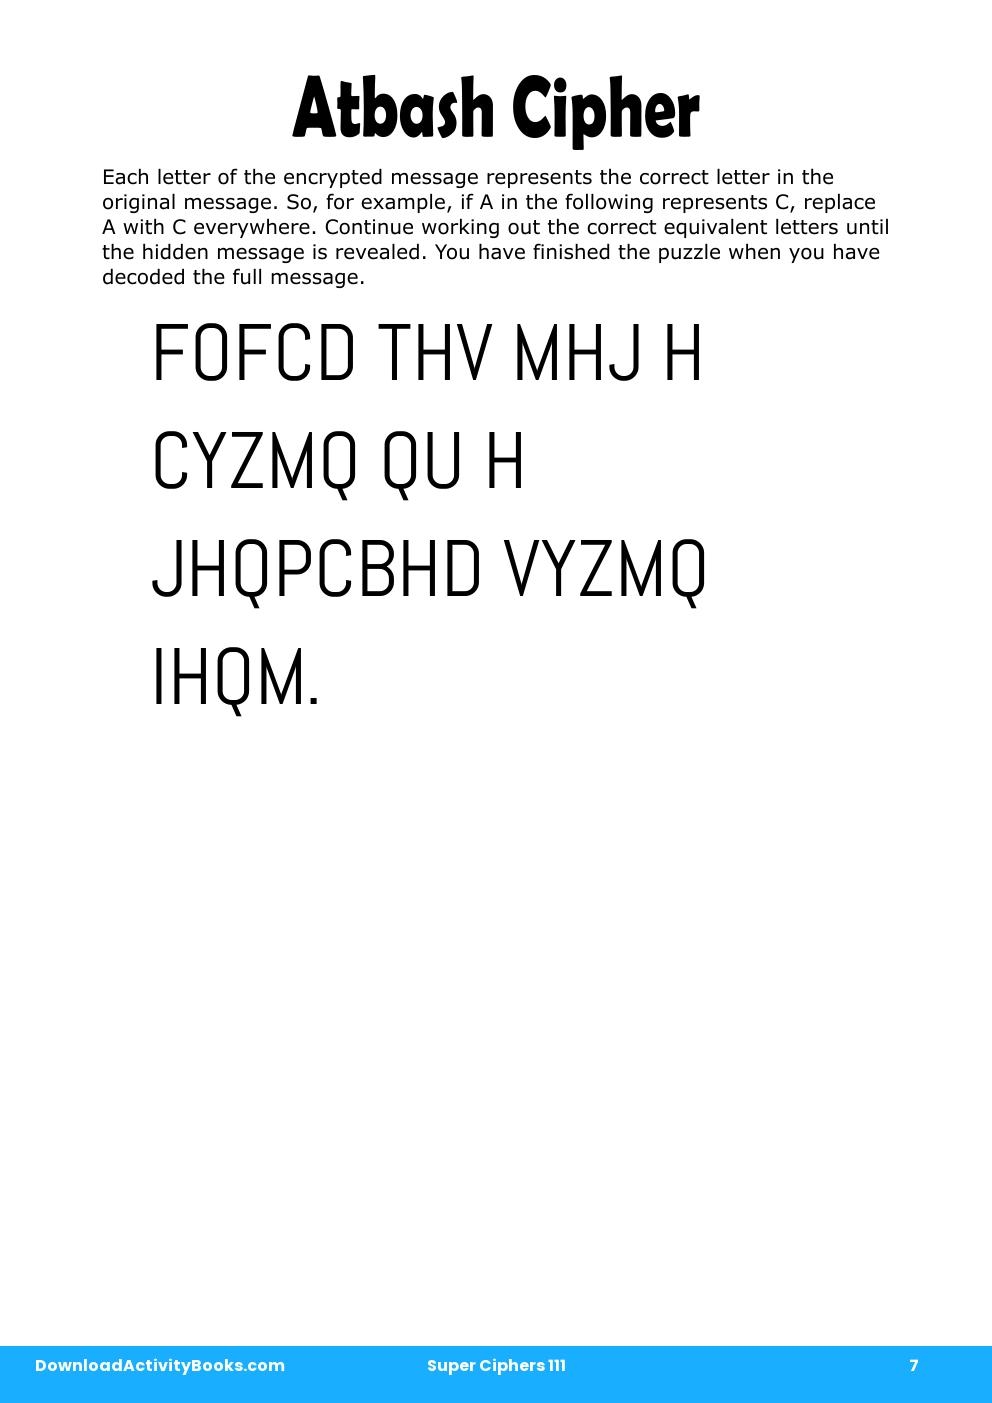 Atbash Cipher in Super Ciphers 111